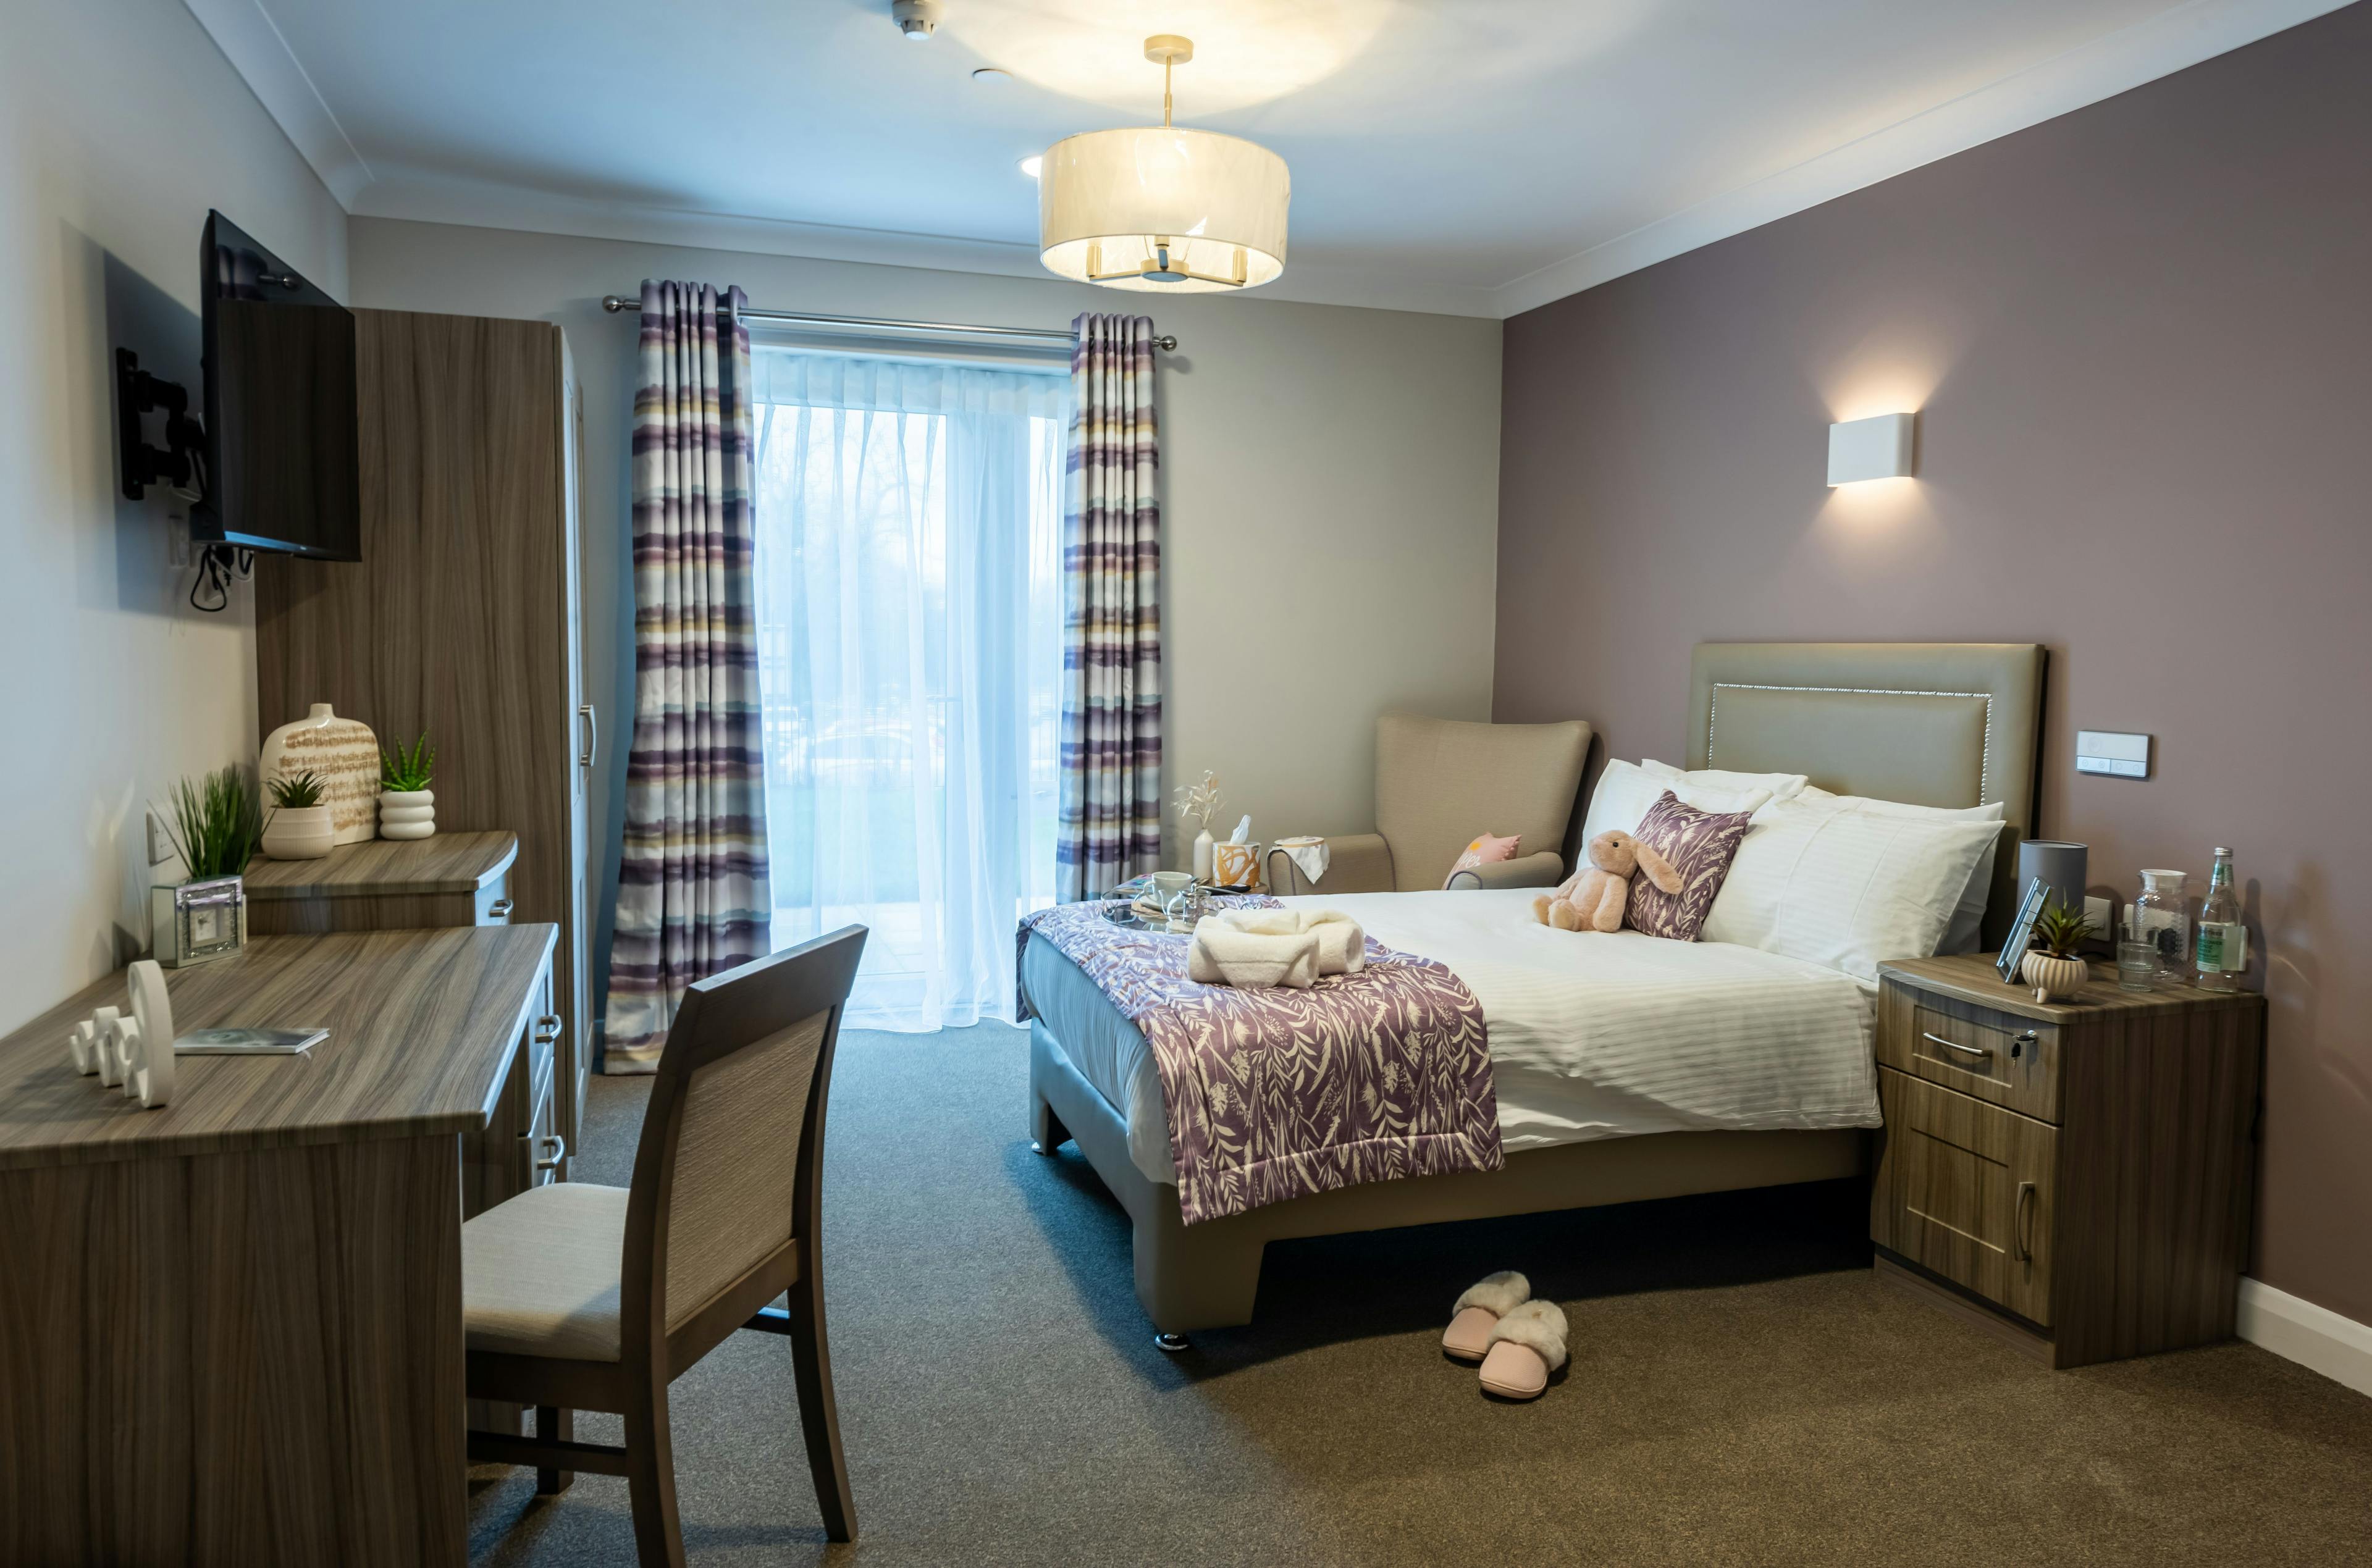 Bedrooms of Astley View care home in Chorley